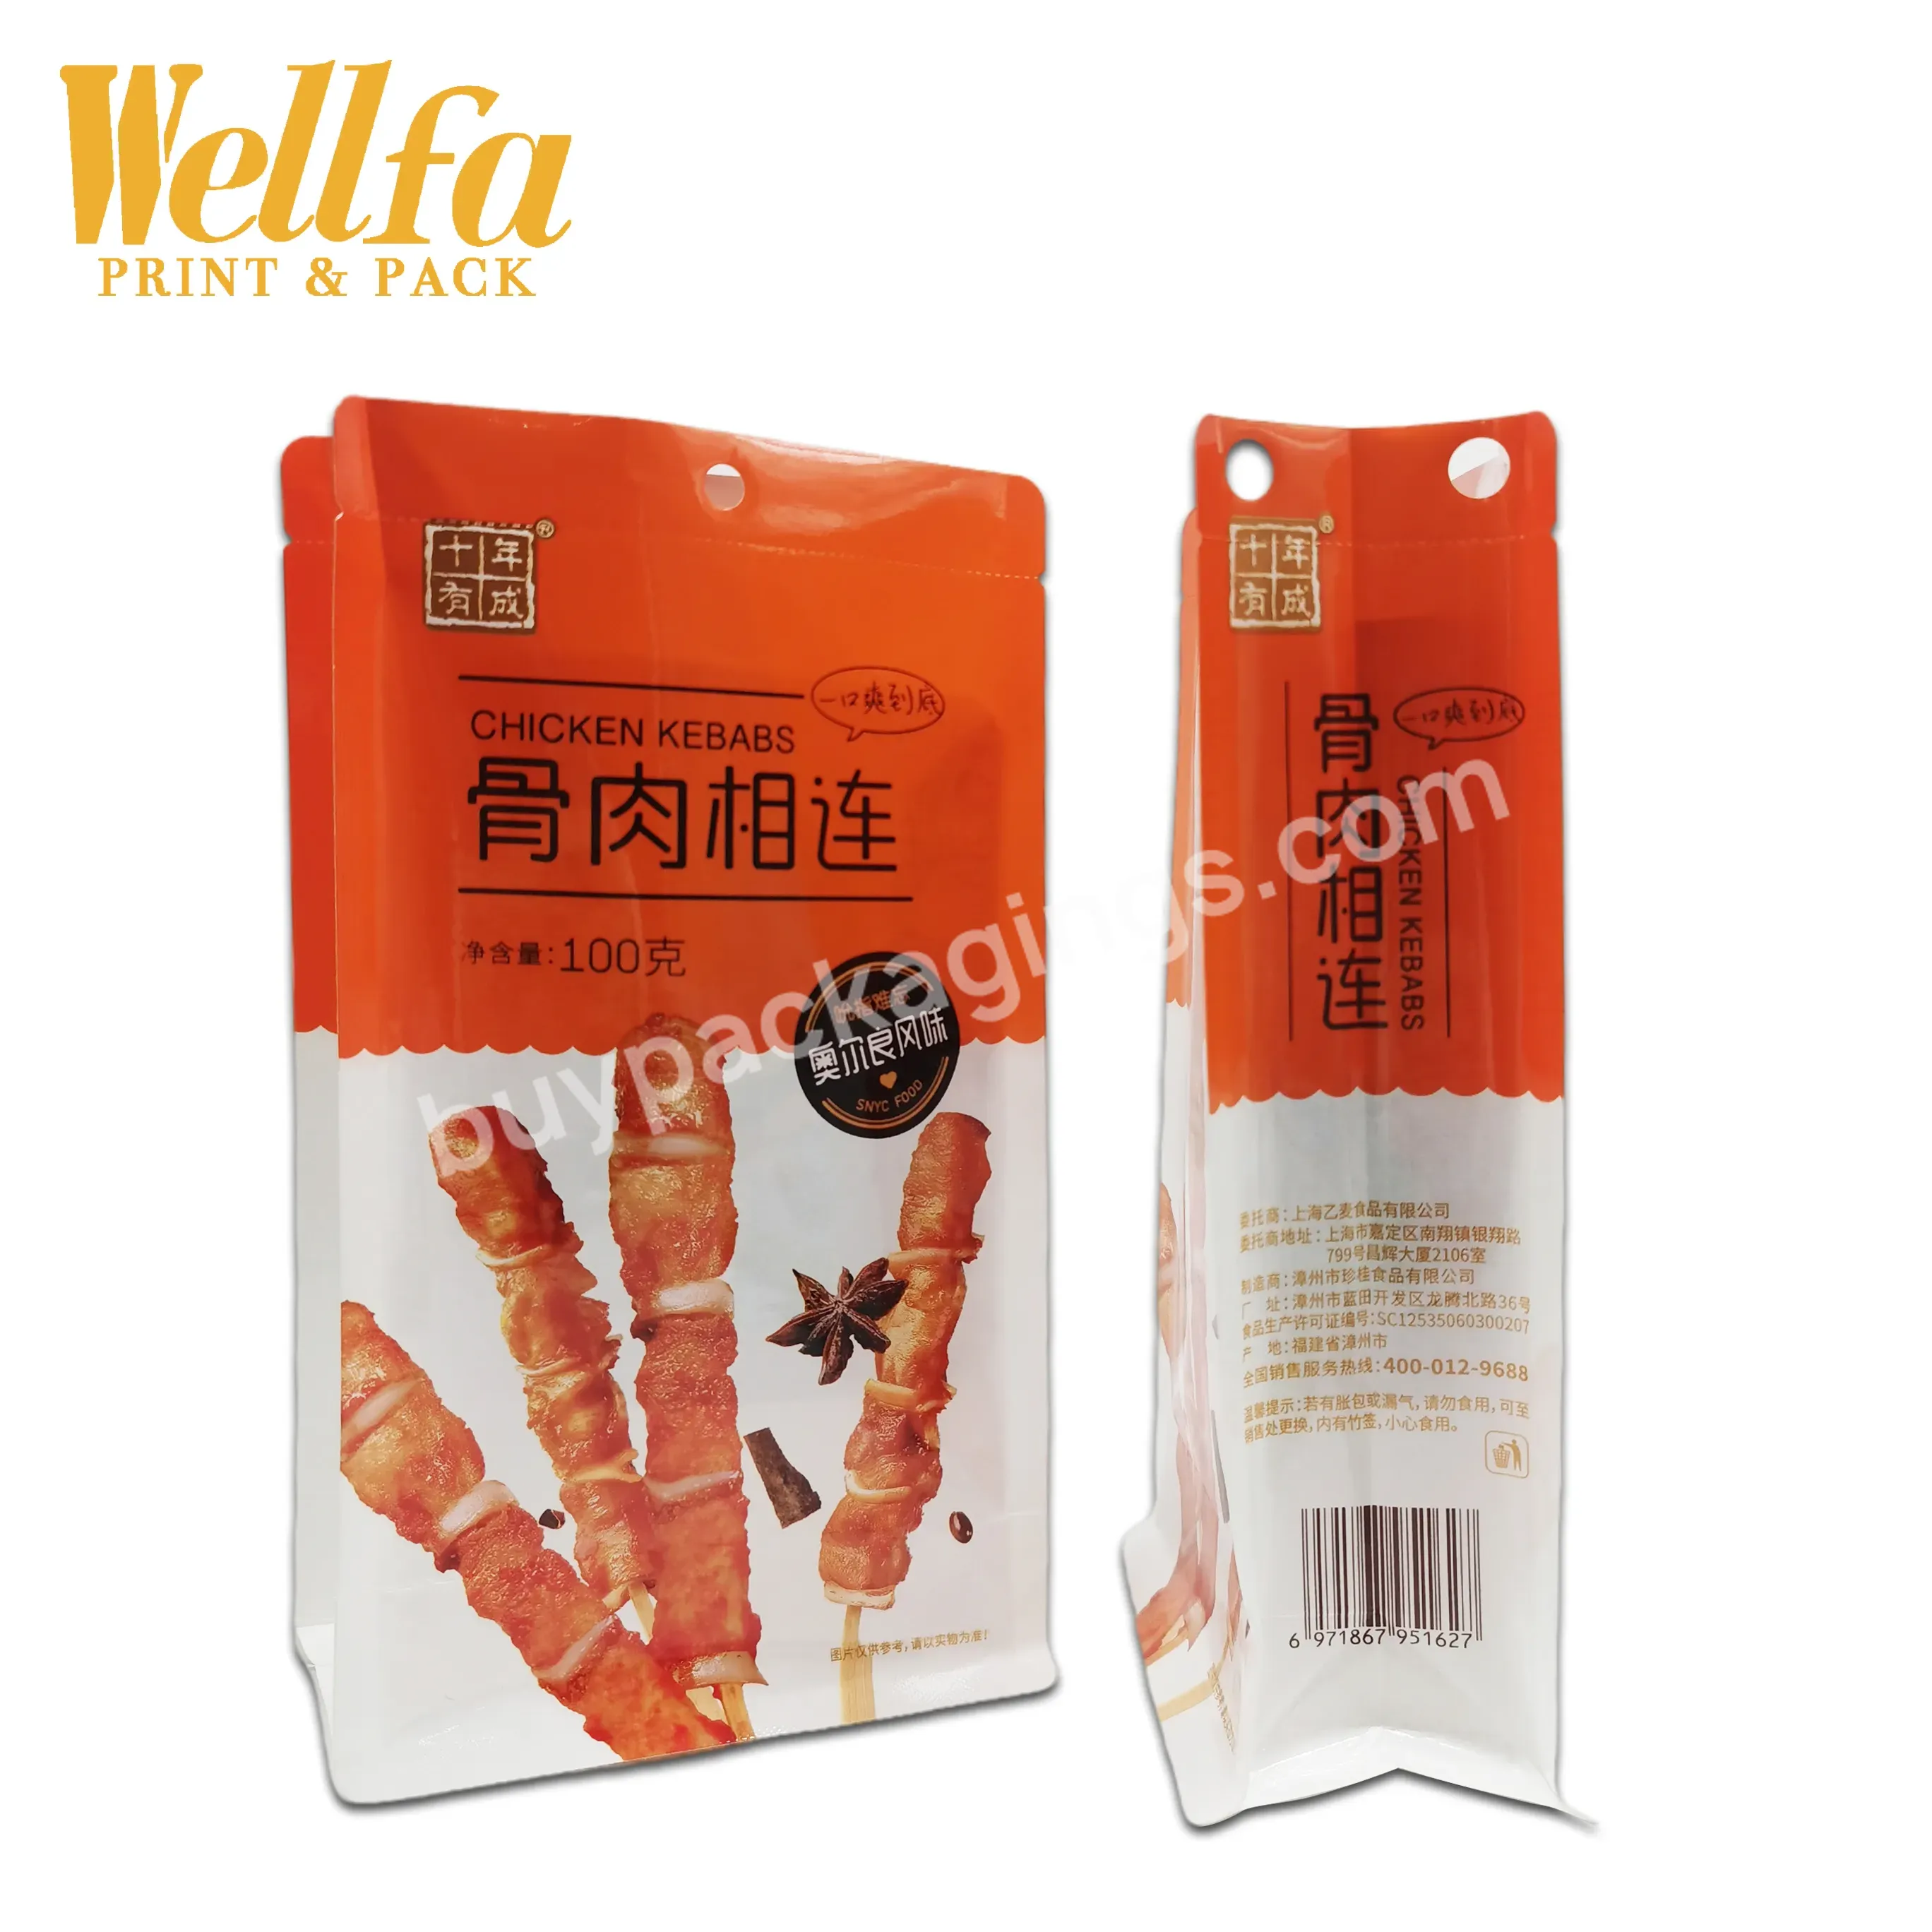 Factory Oem Custom Print Uv Surface Flat Bottom Pouch With Handle For Ready To Eat To Food Snake